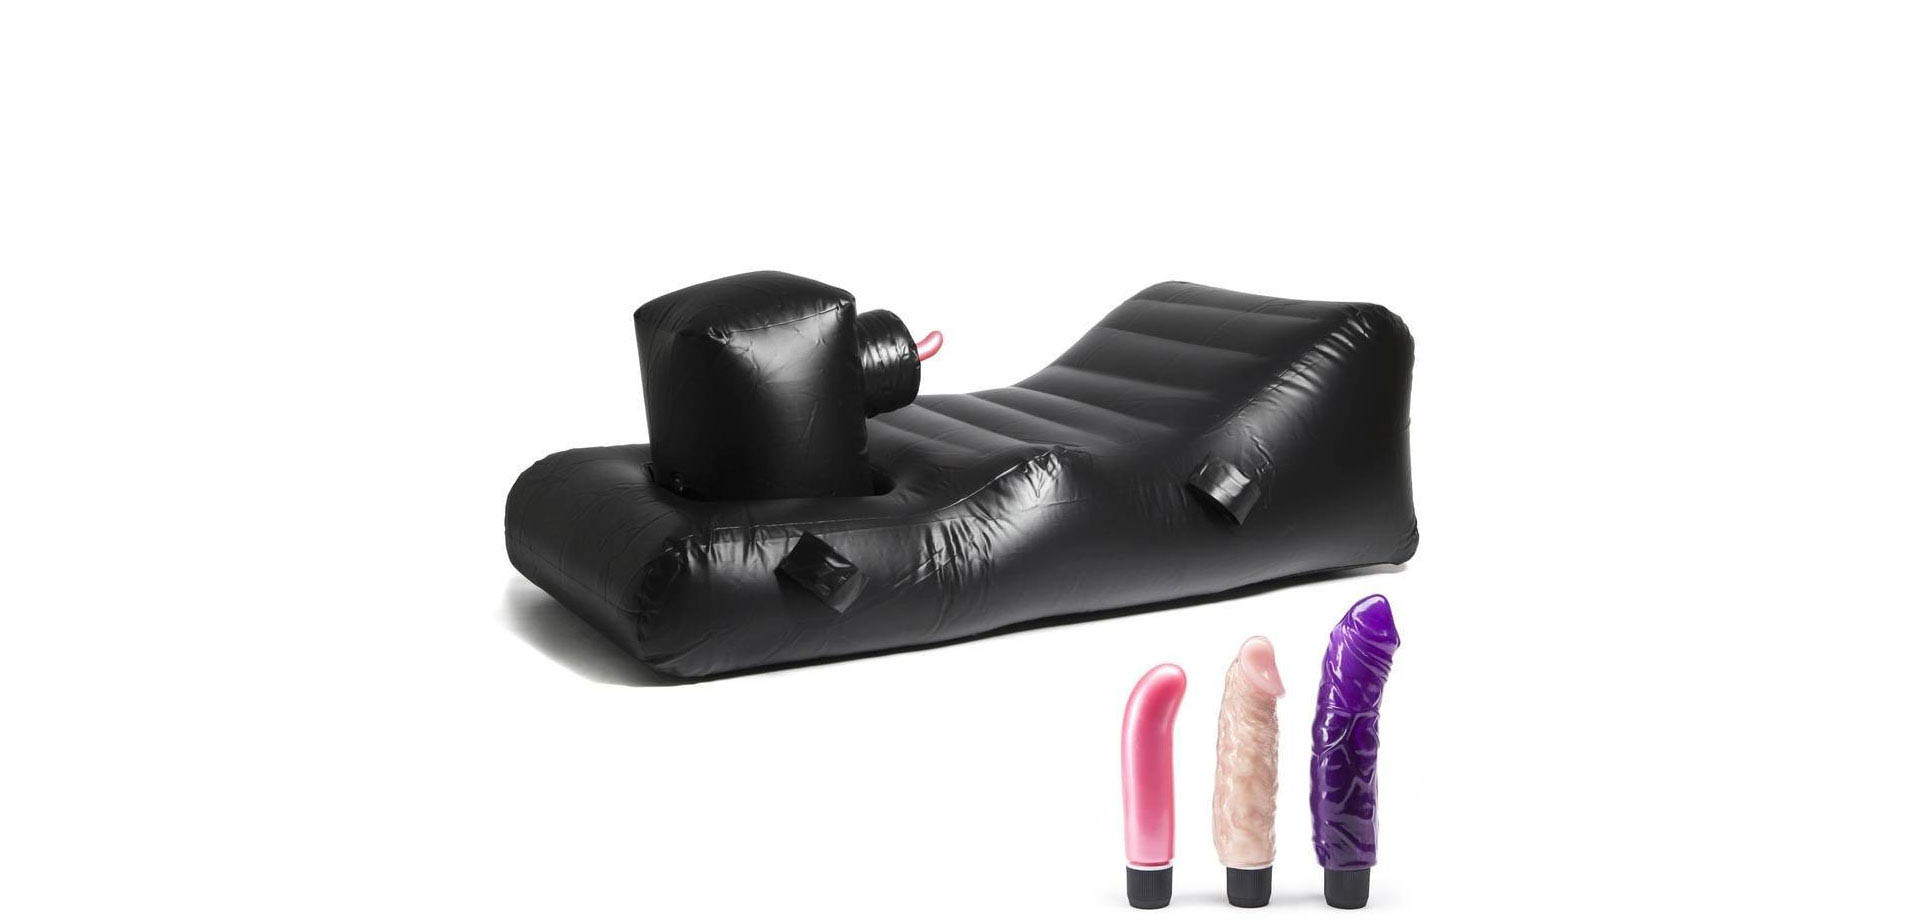 Louisiana Lounger Inflatable Thrusting Sex Toy Machine.